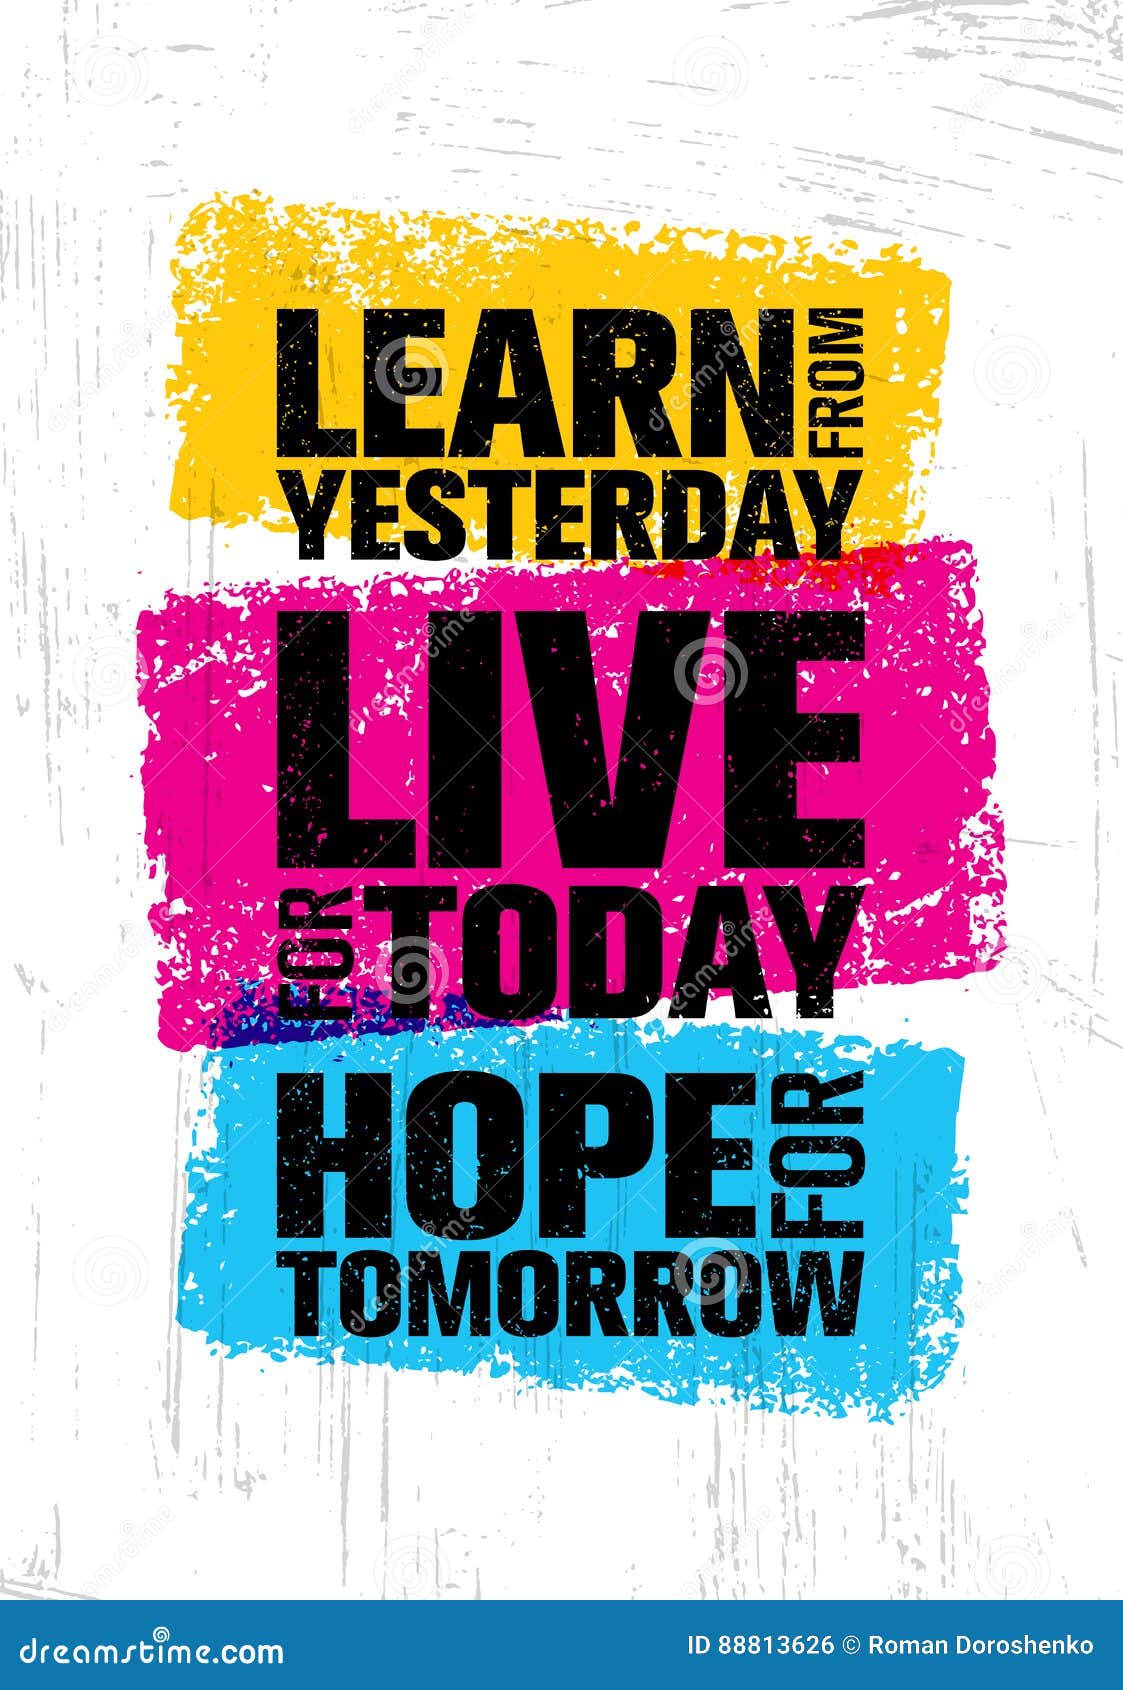 learn from yesterday. live for today. hope for tomorrow. inspiring creative motivation quote template.